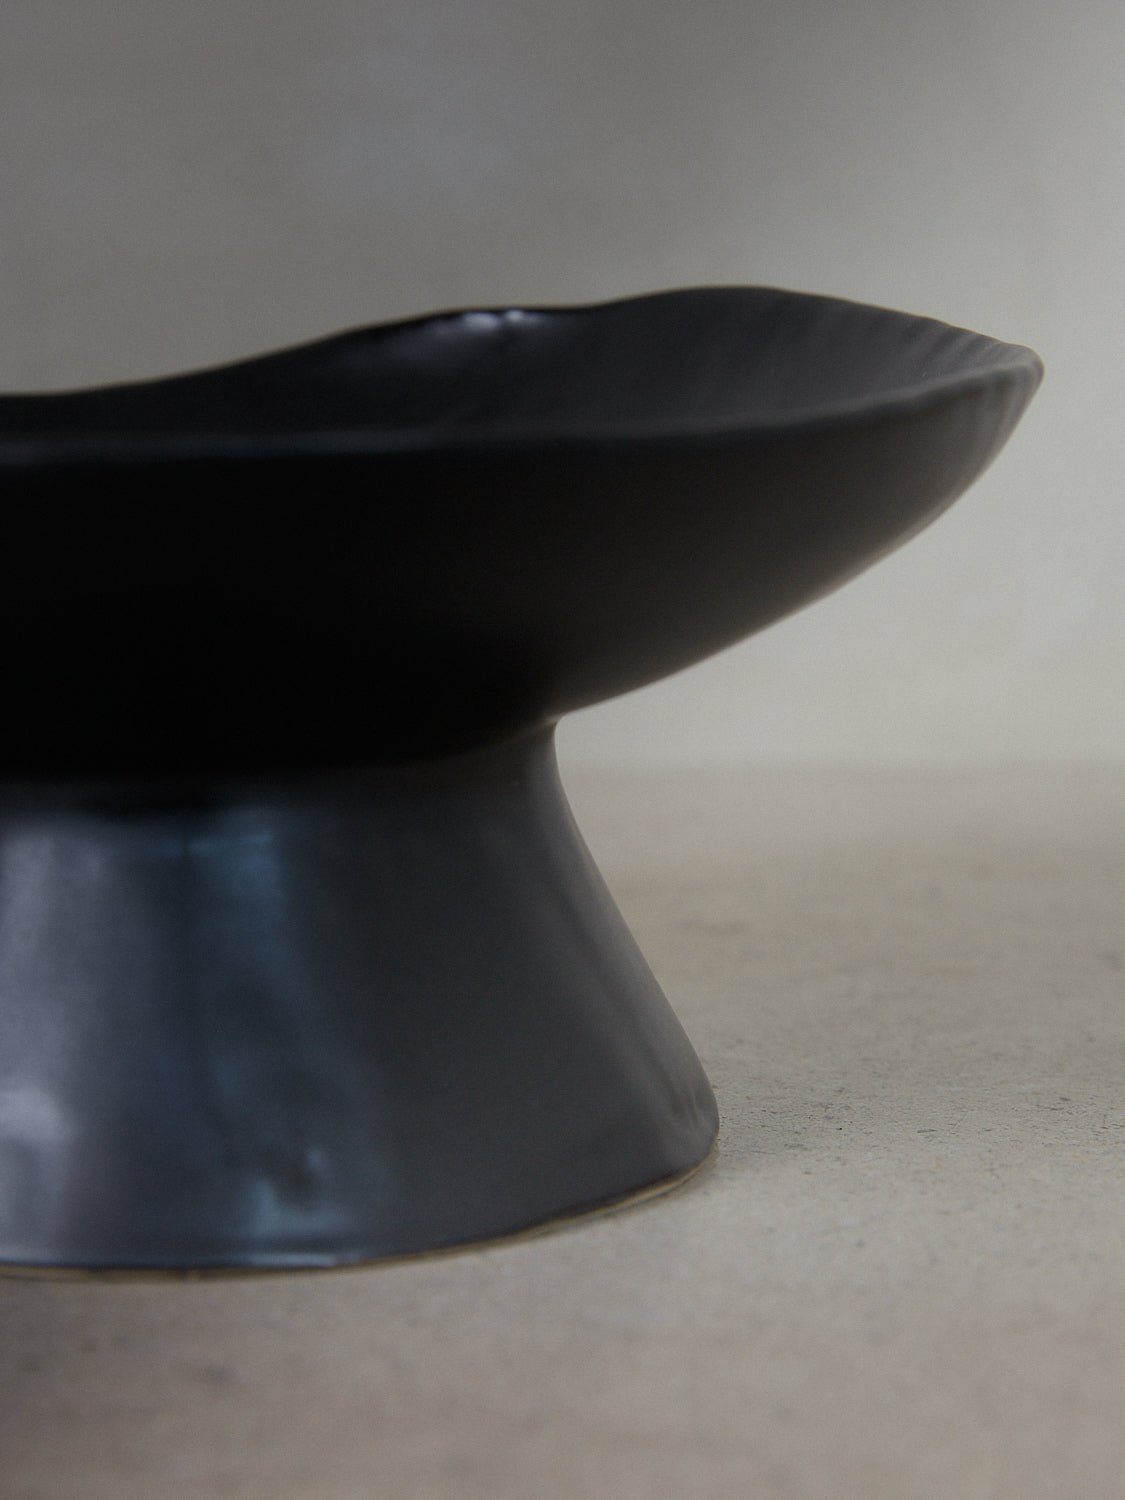 Black Raw Pedestal. Exclusively ours. Handmade ceramic compote bowl with tapered pedestal foot base in a matte black finish